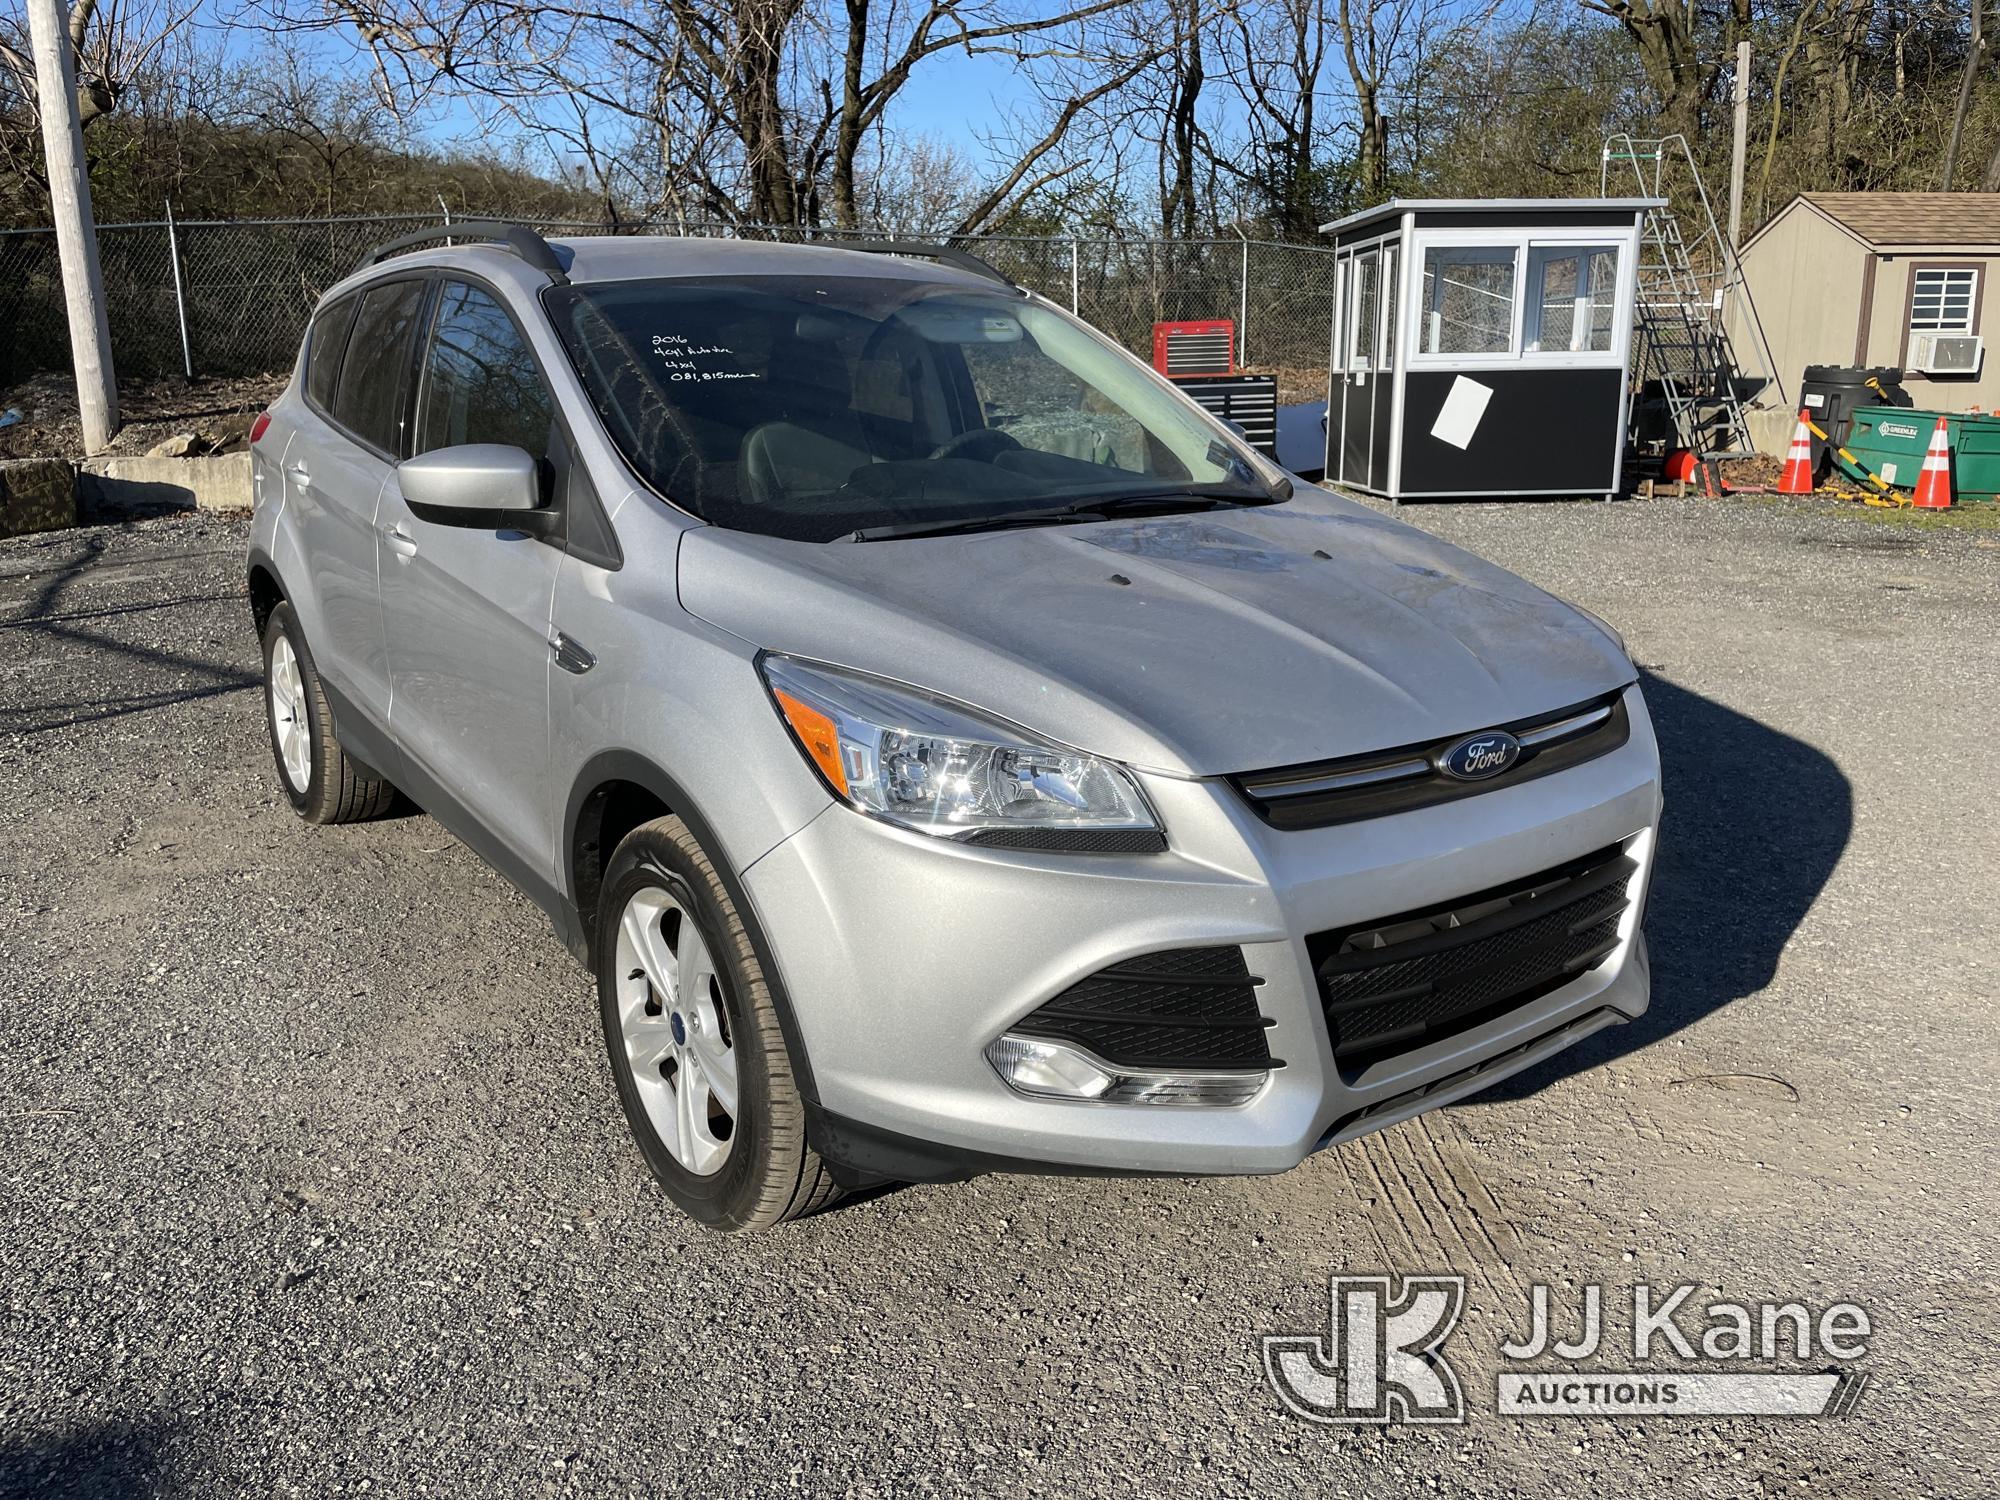 (Plymouth Meeting, PA) 2016 Ford Escape 4x4 4-Door Sport Utility Vehicle Runs & Moves, Minor Body &